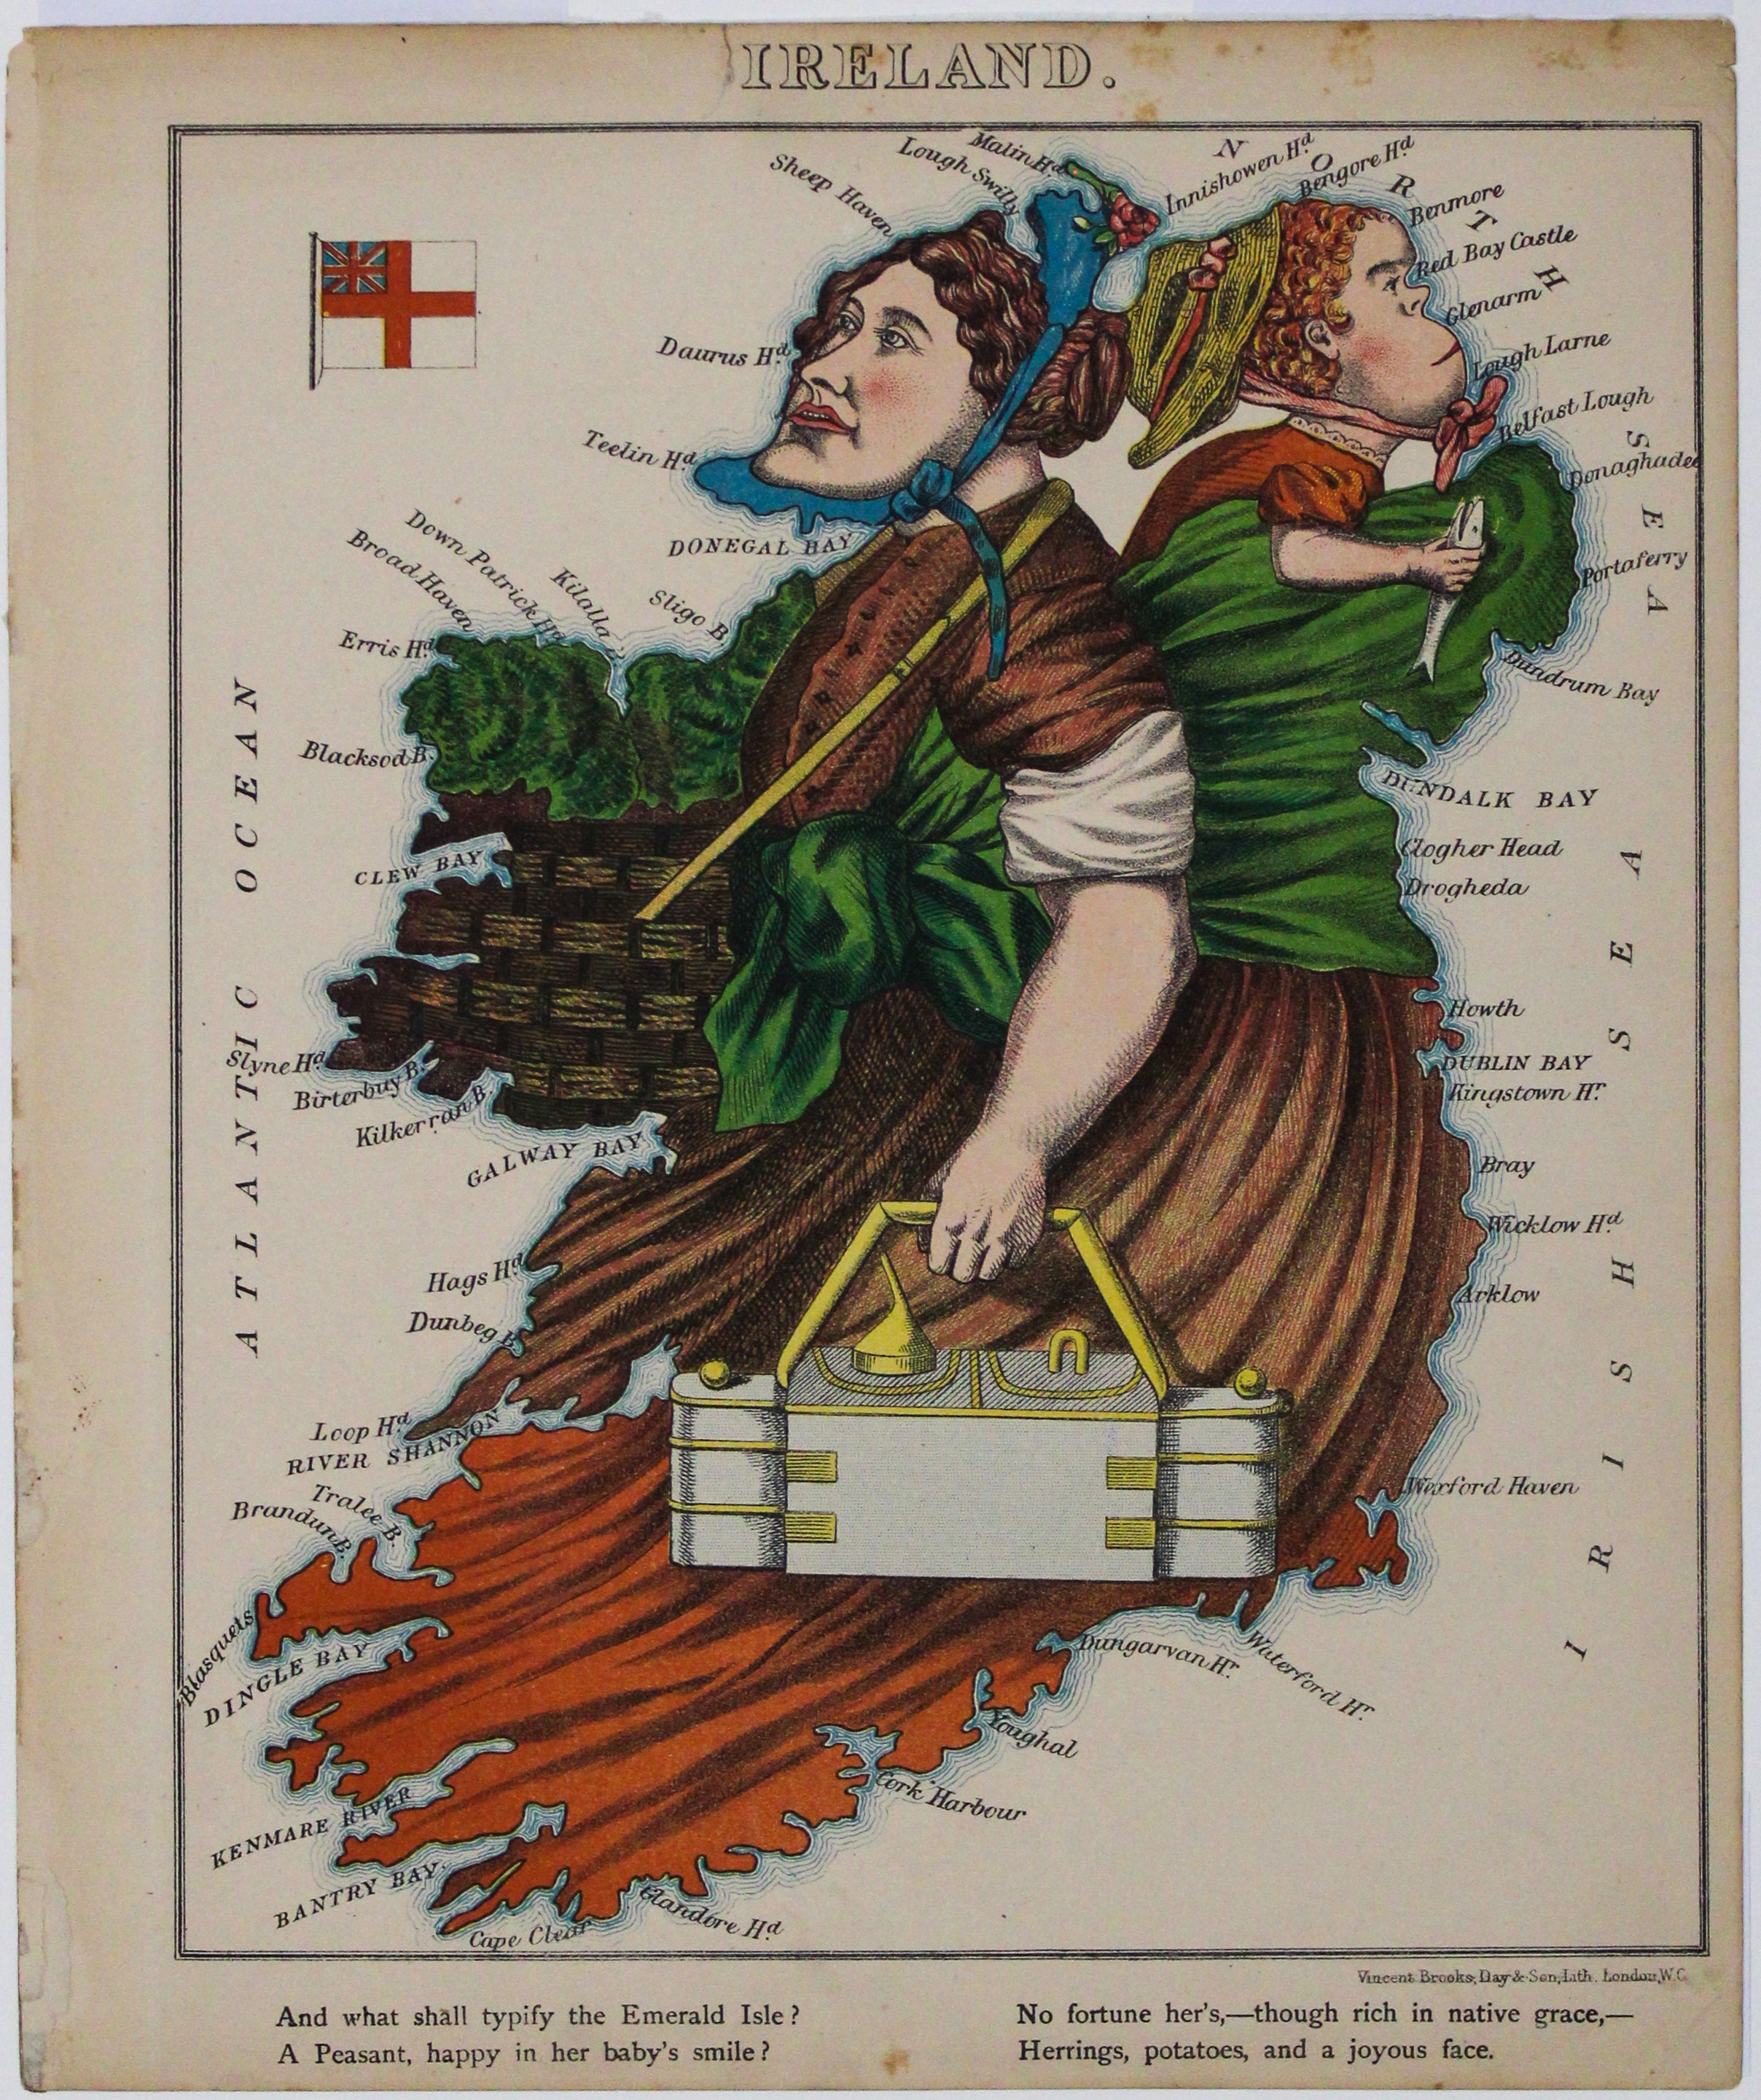 Aleph's Caricature Map of Ireland